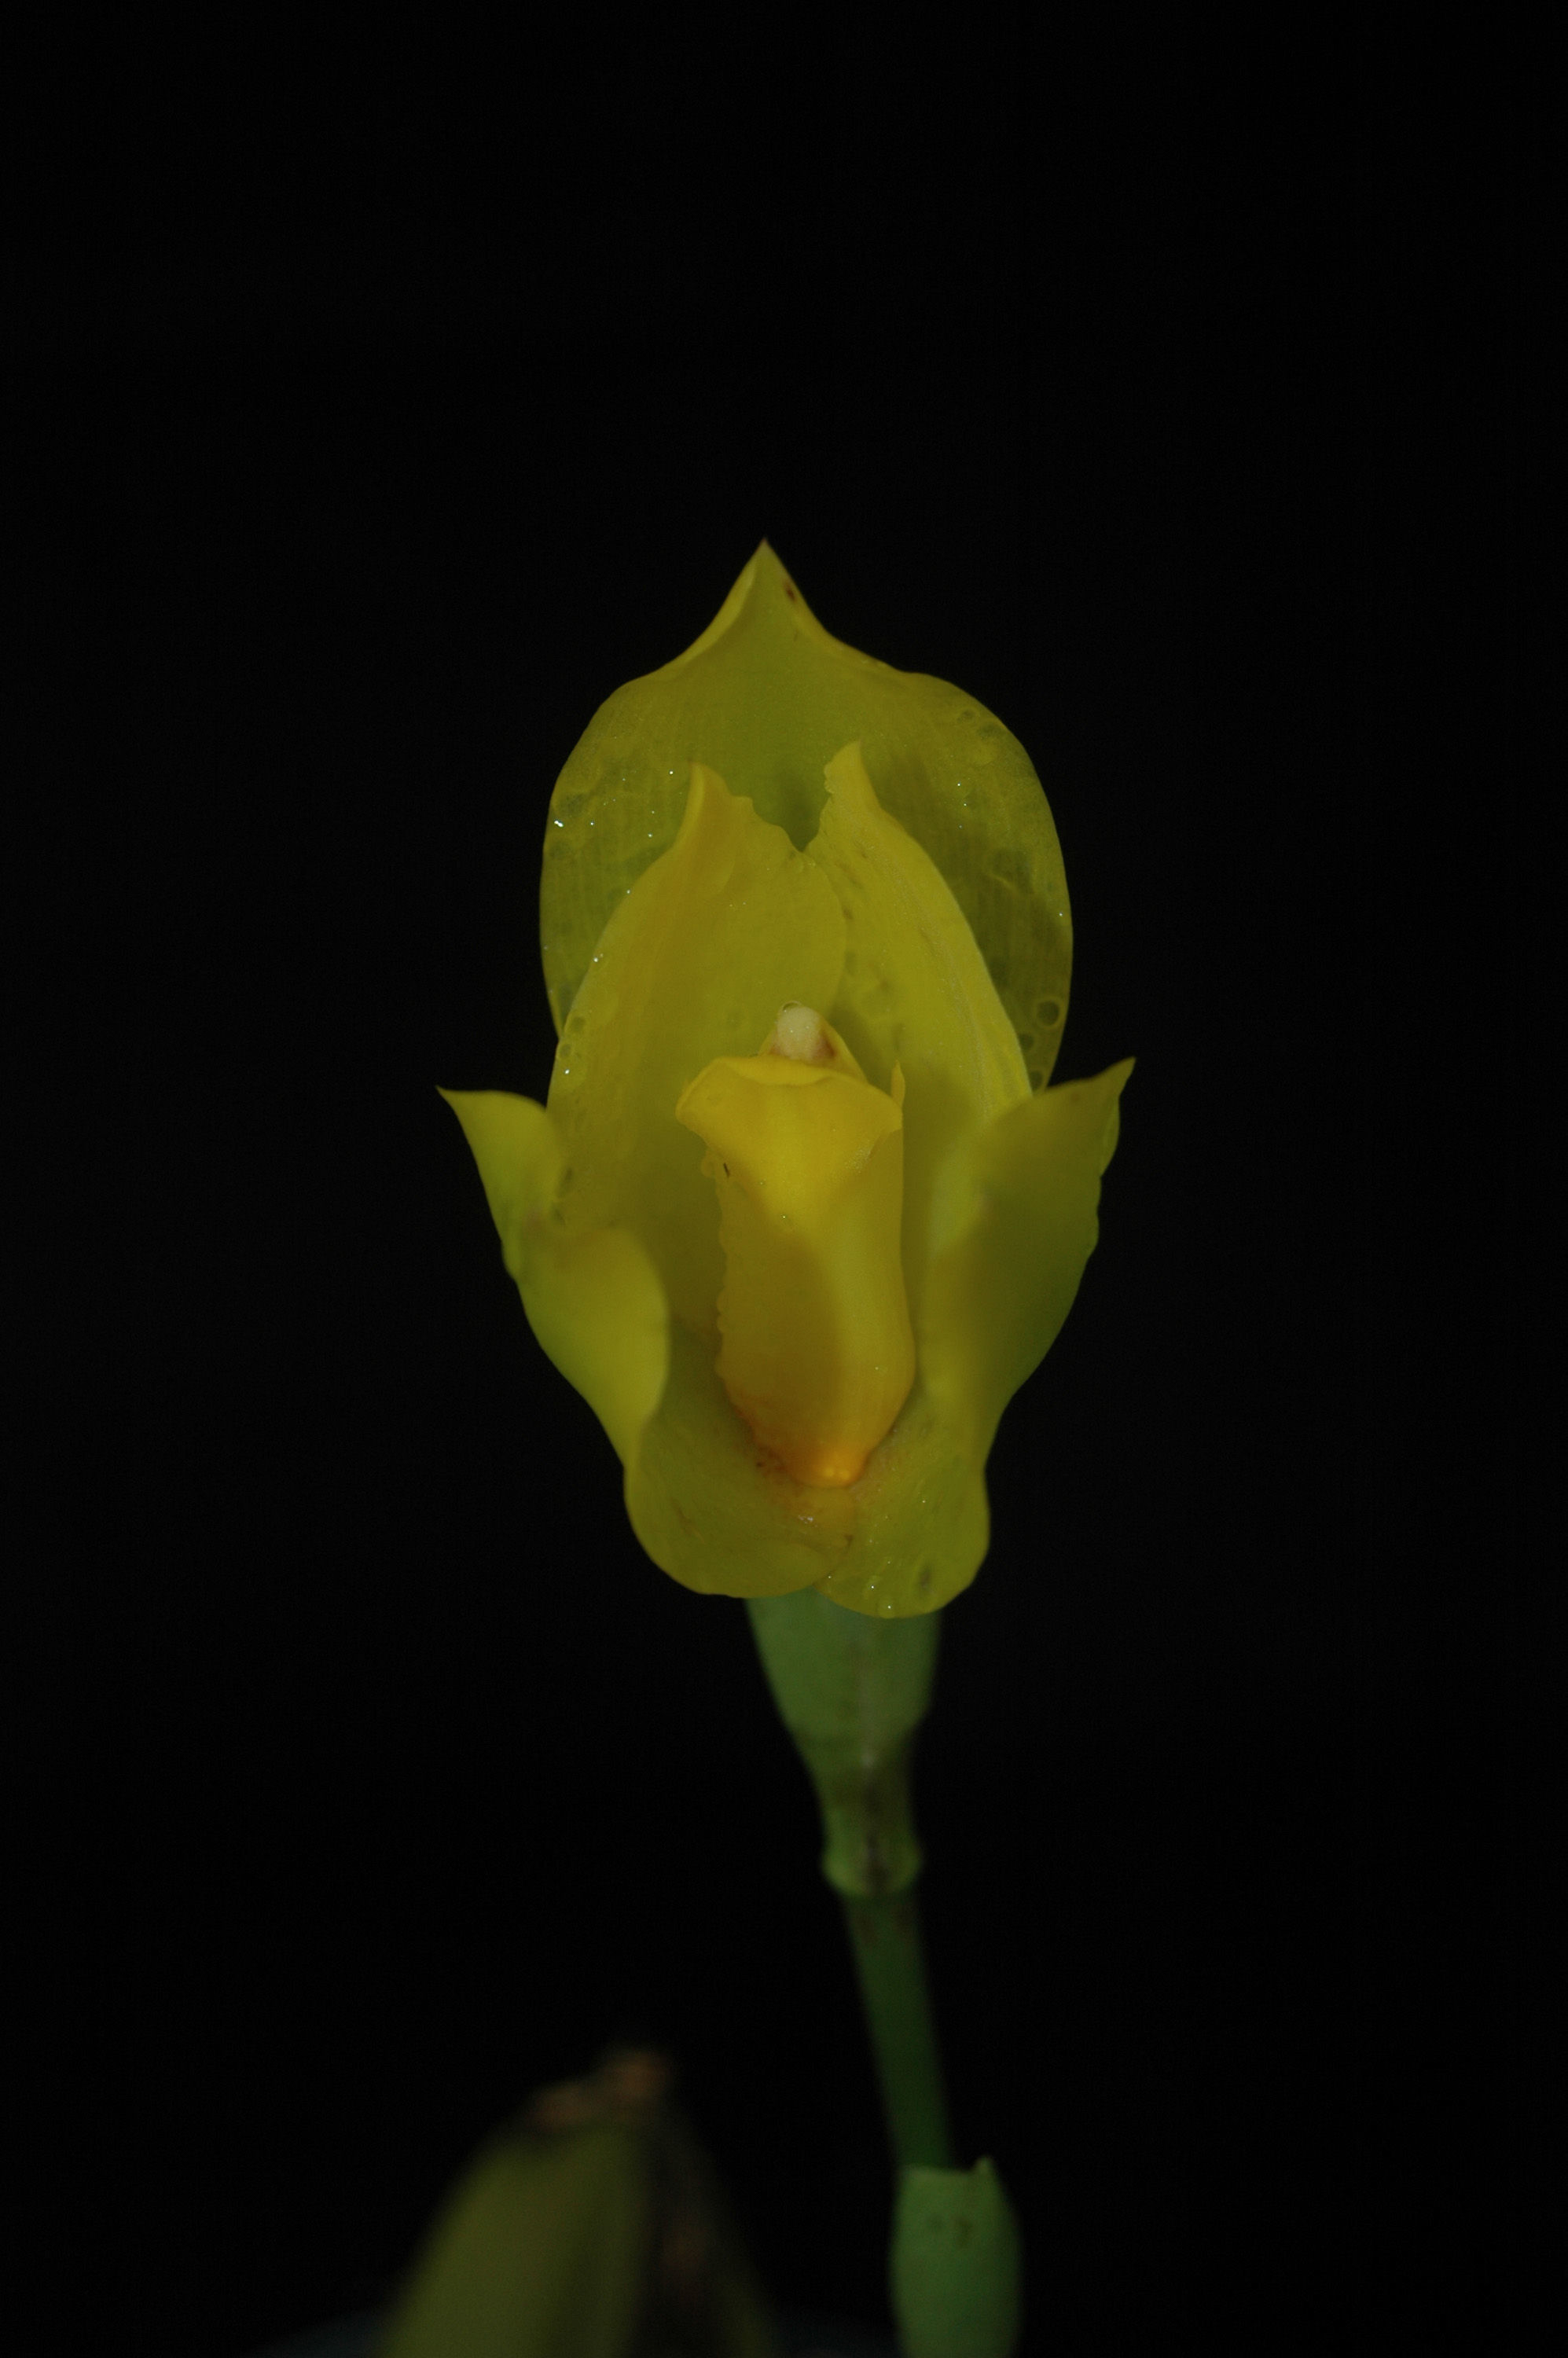 Image of Tulip orchids